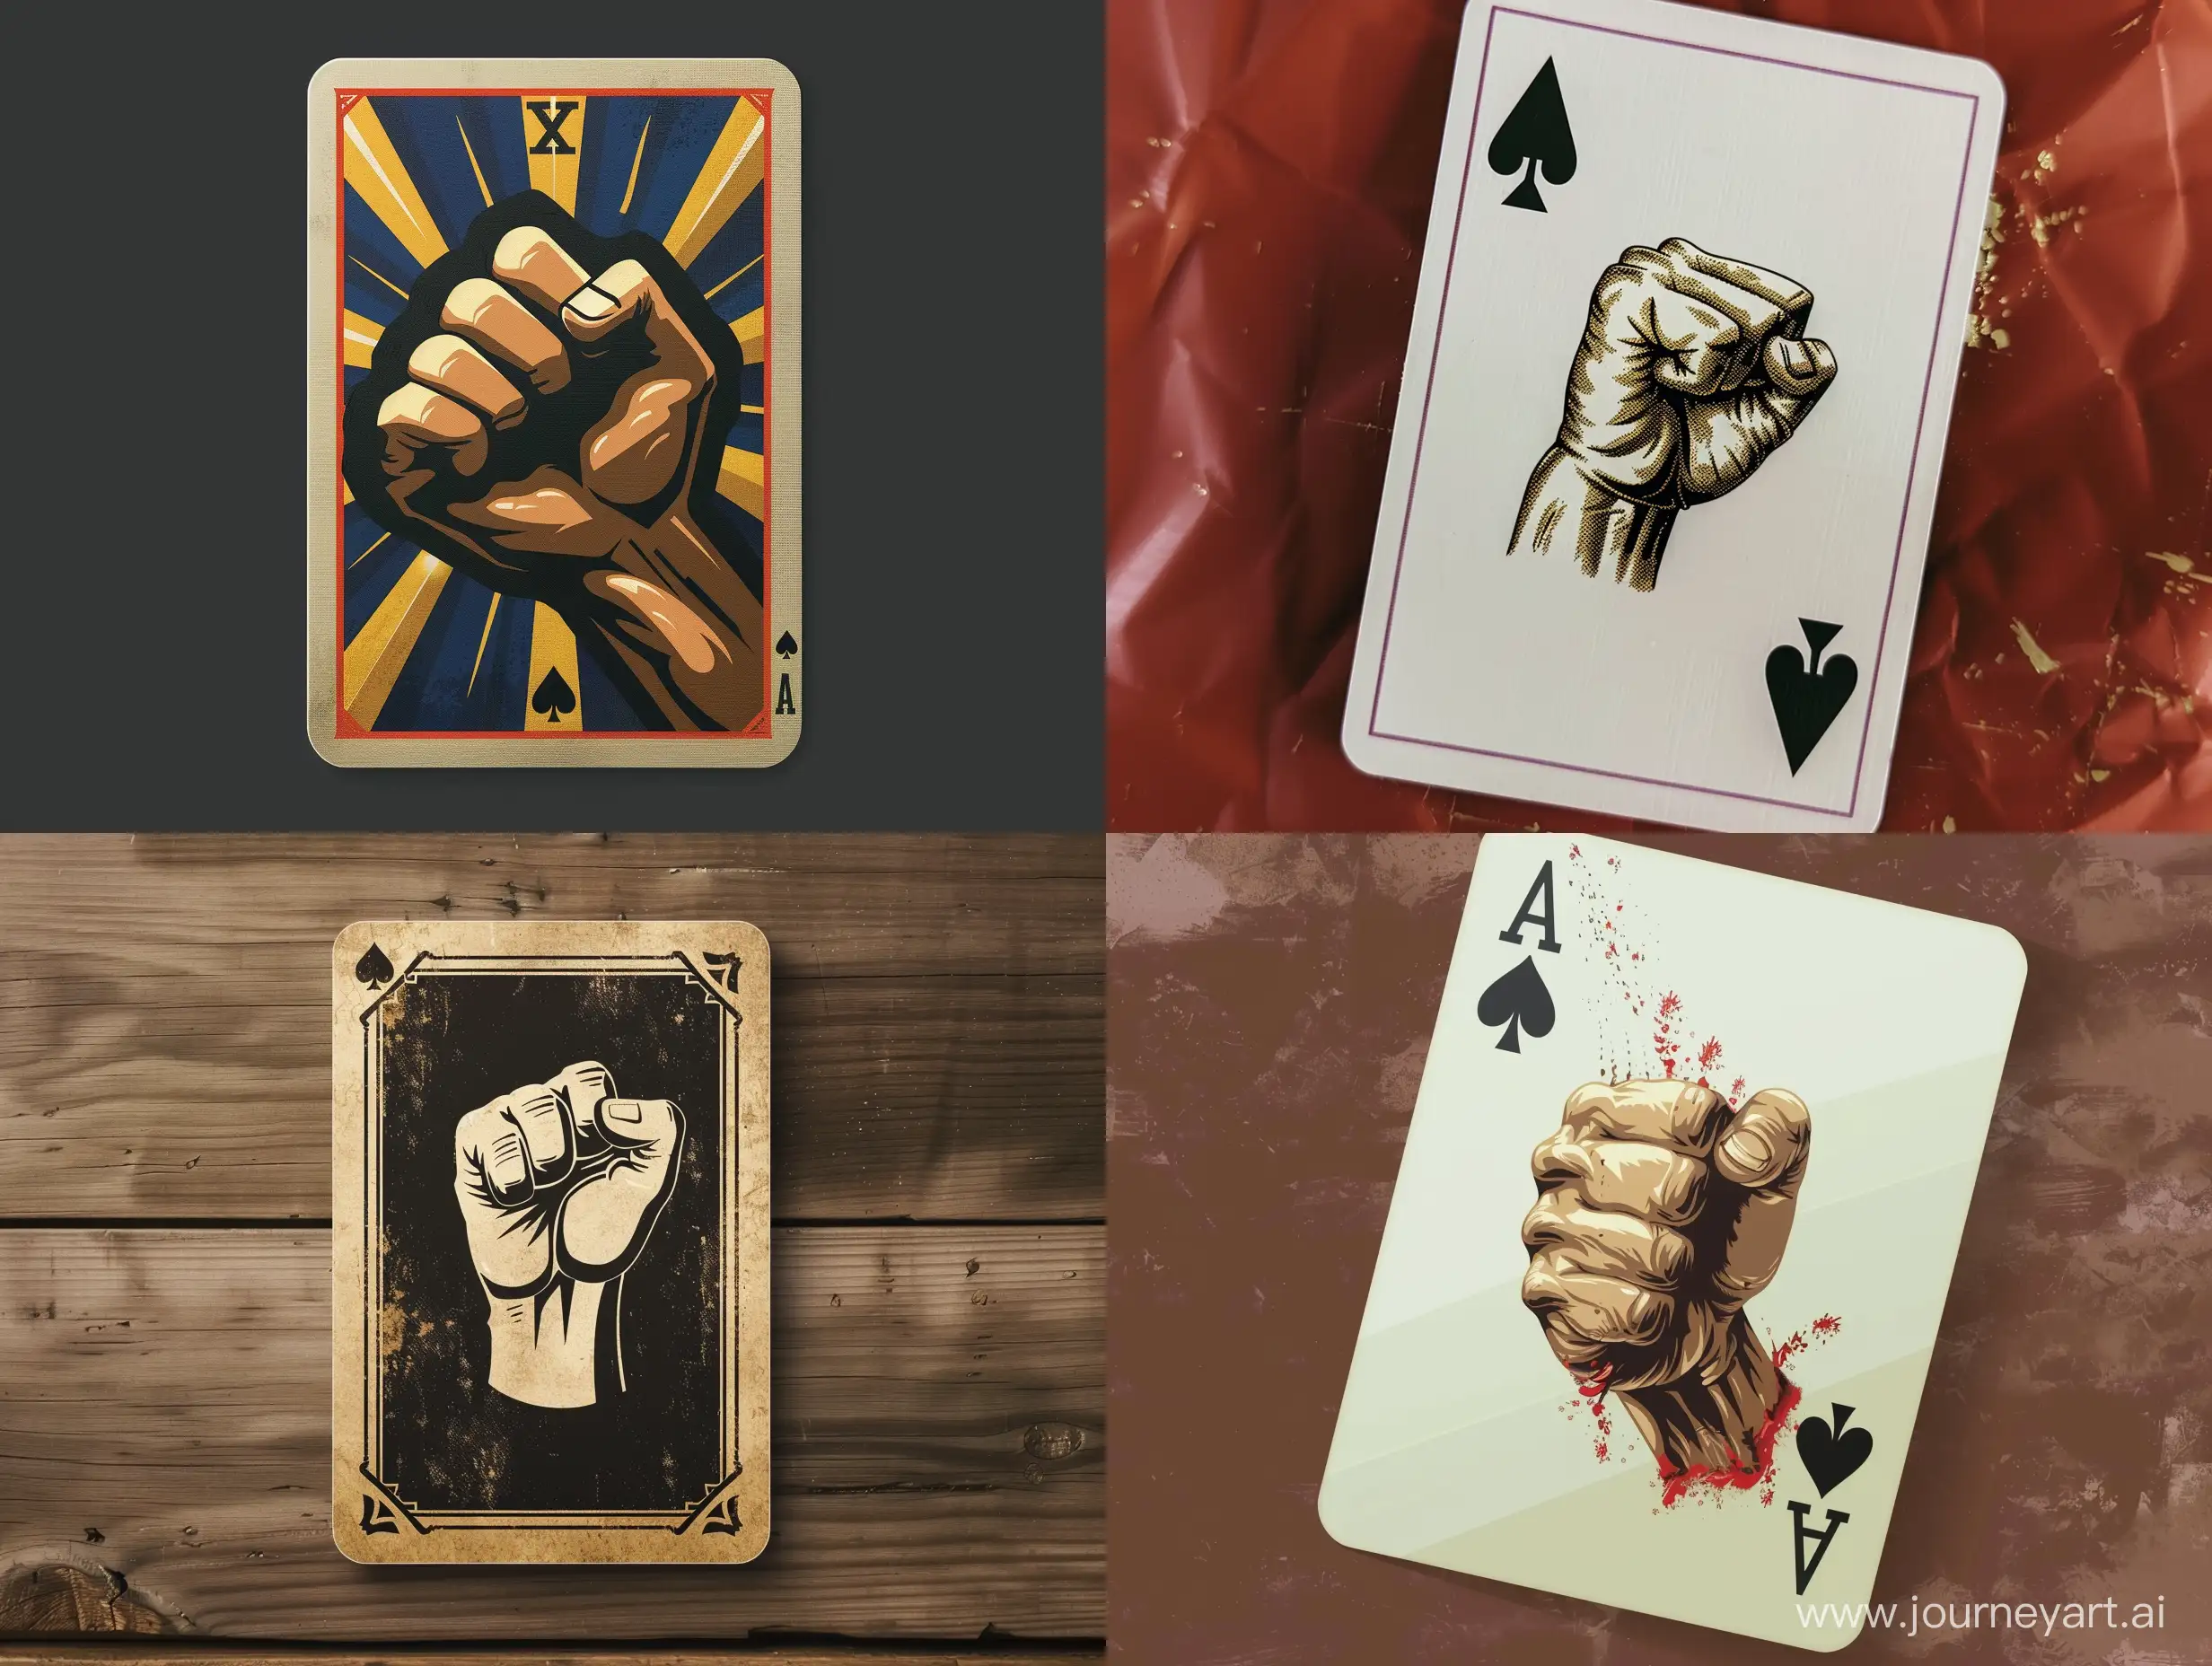 A playing card depicting a fist with upward  movement, retro fighting game